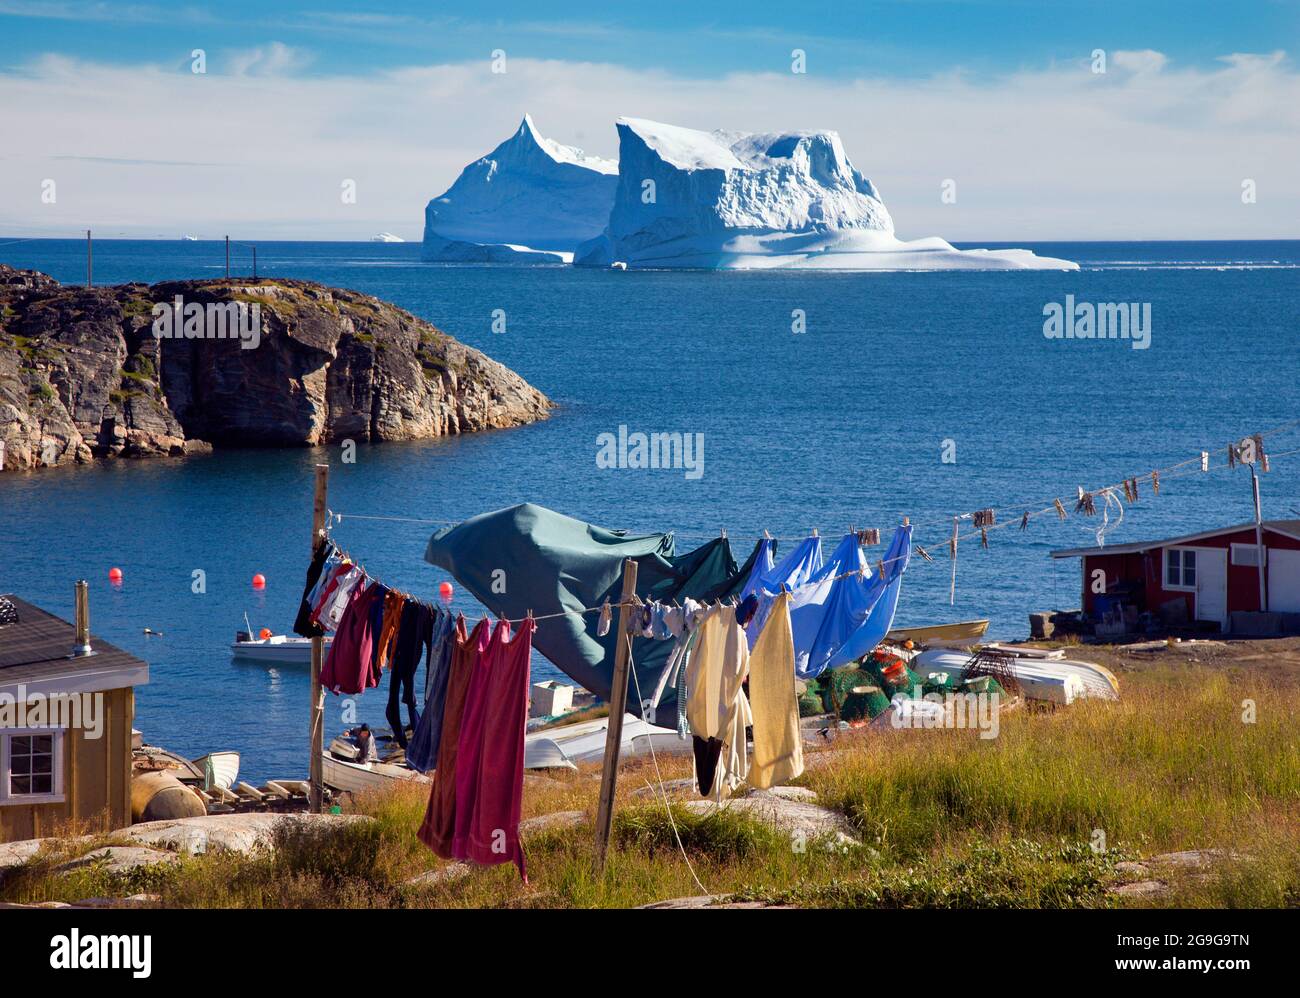 A large iceberg grounded in a bay just off the west coast town of Qeqertarsuaq, Greenland, with a washing line in the foreground and clothes drying Stock Photo